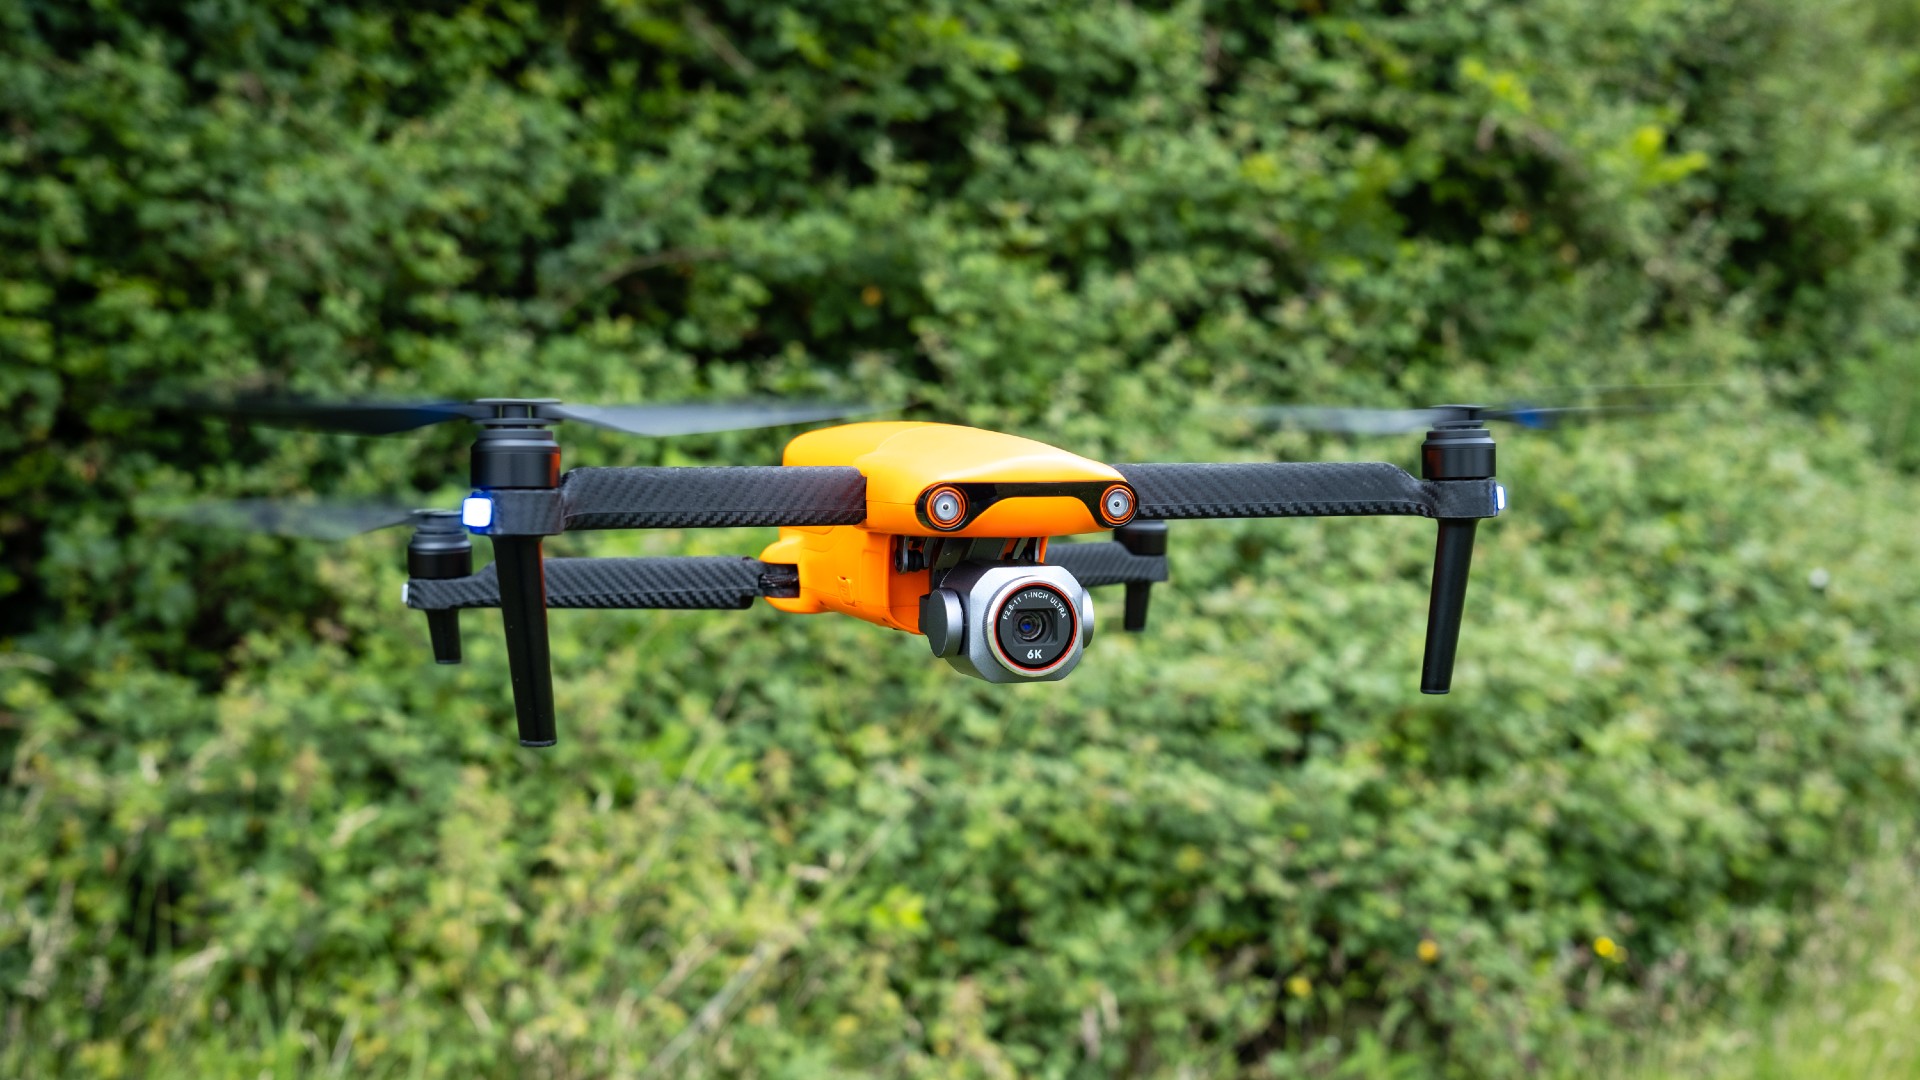 Hands-on with the DJI Air 3: The perfect all-rounder drone